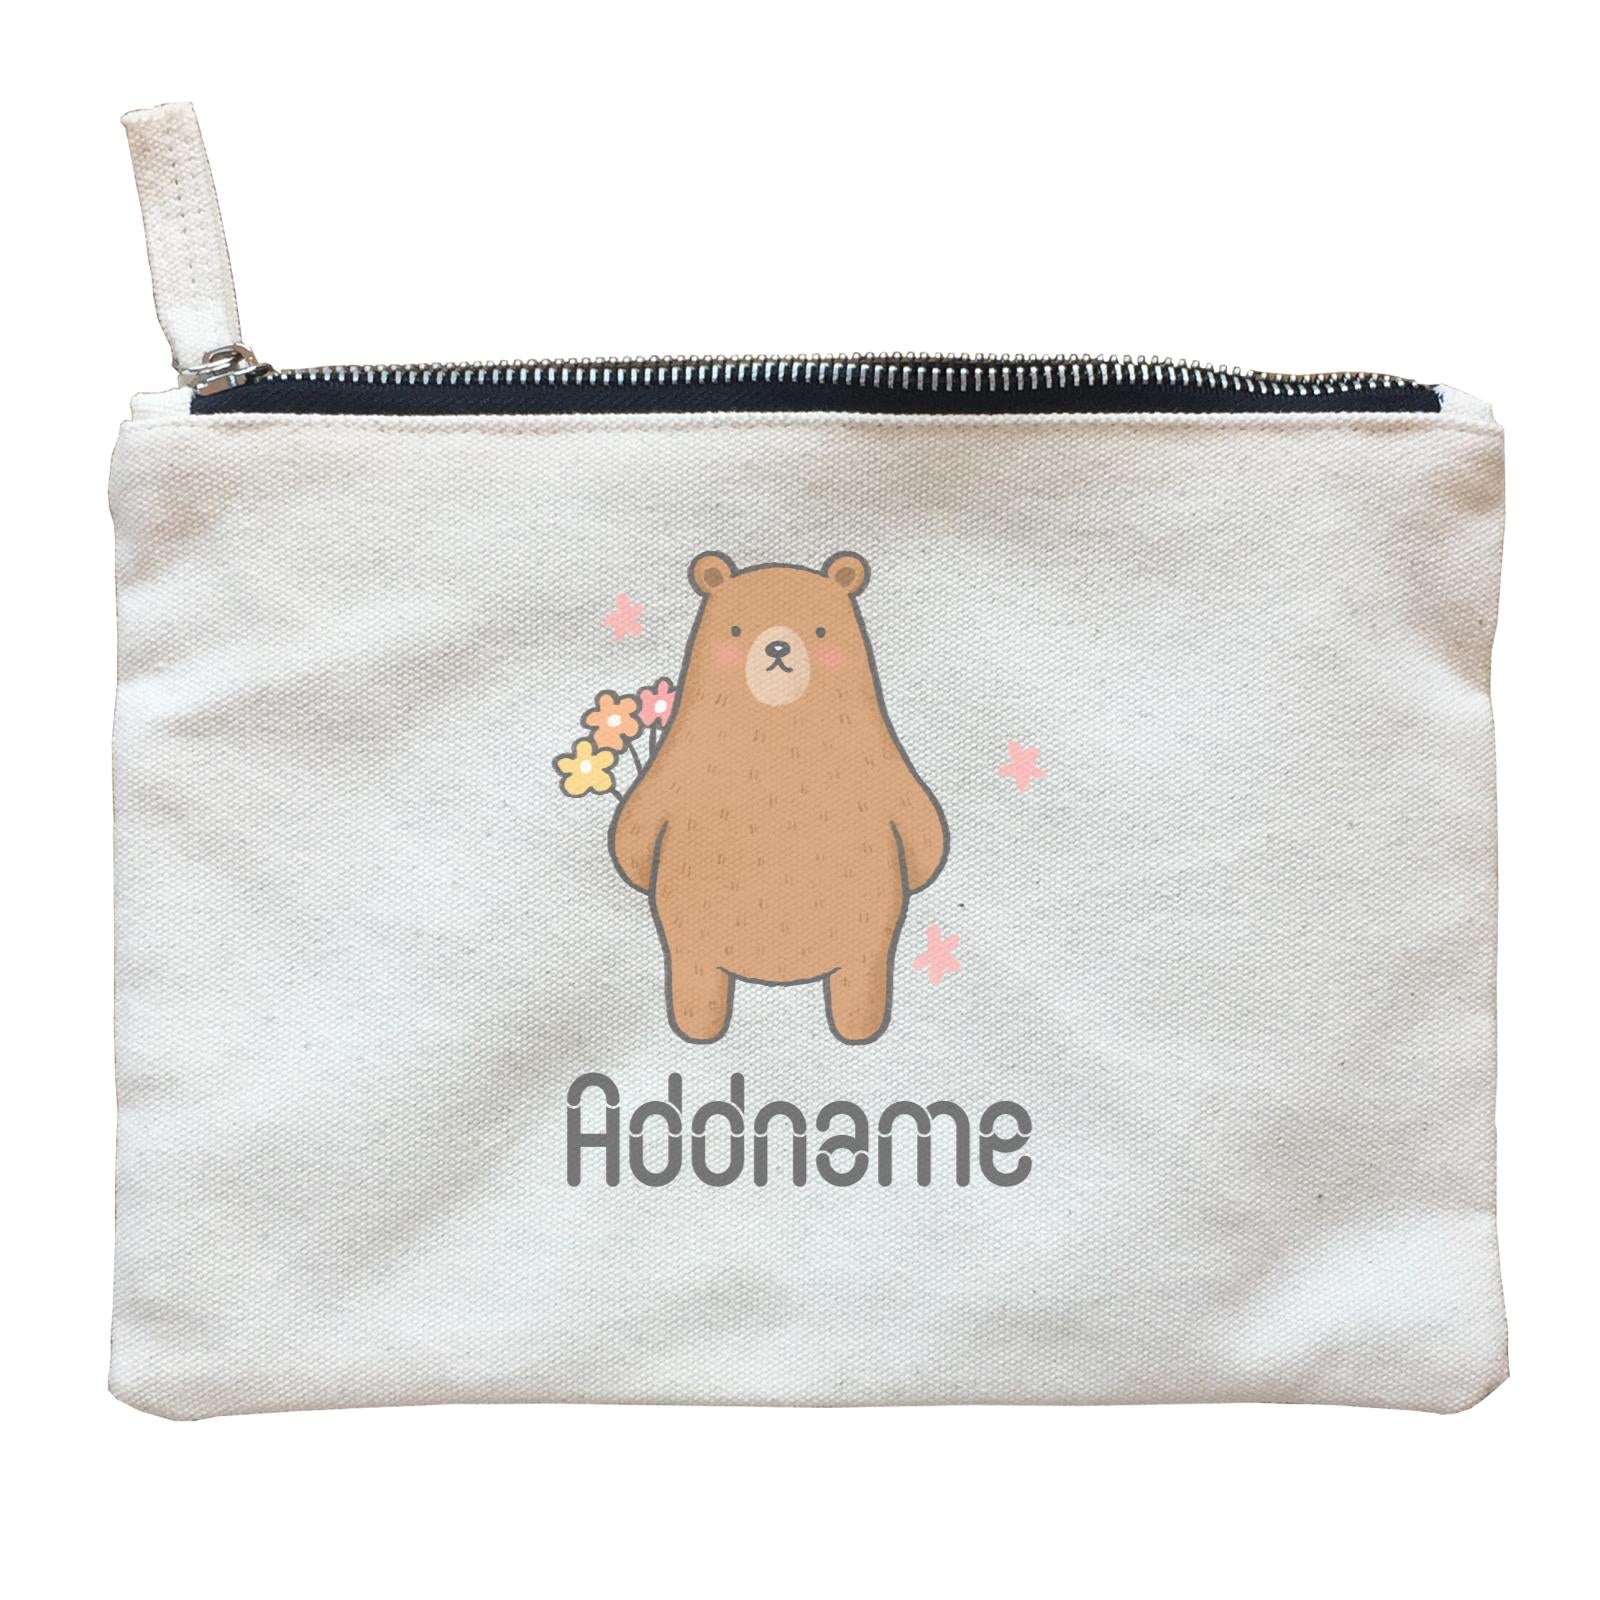 Cute Hand Drawn Style Bear with Flowers Addname Zipper Pouch